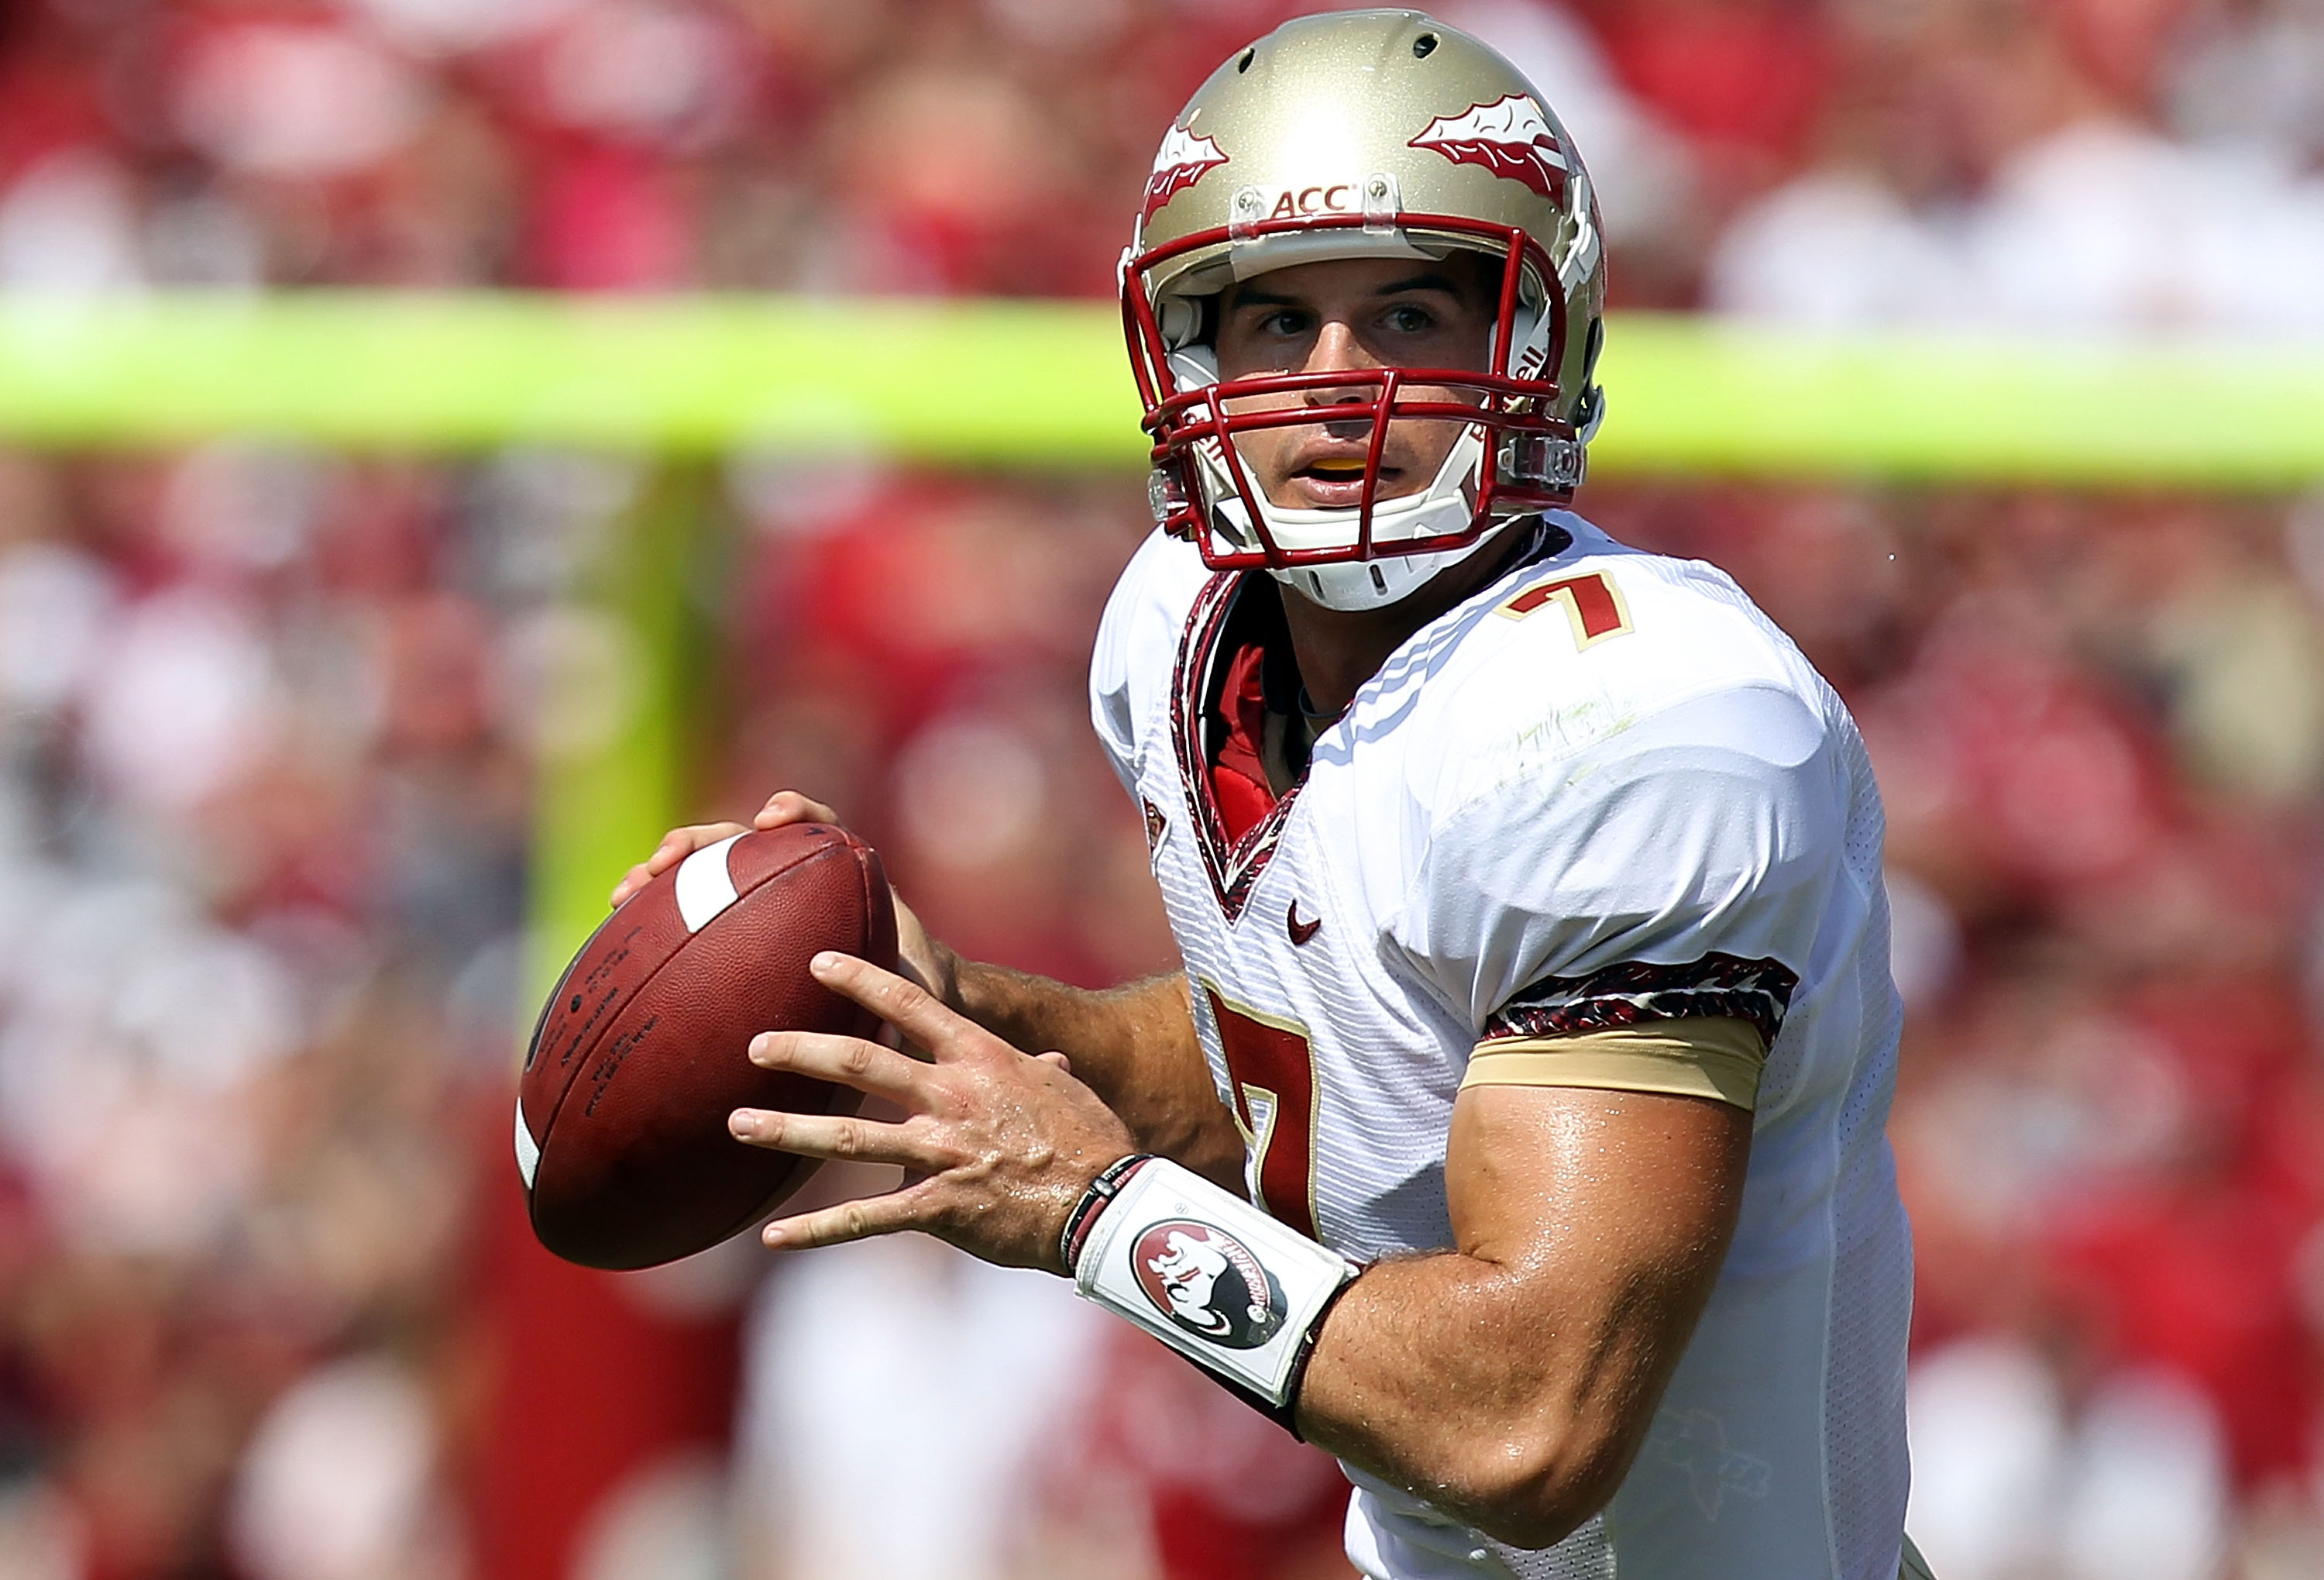 NORMAN, OK - SEPTEMBER 11:  Quarterback Christian Ponder #7 of the Florida State Seminoles drops back to pass against the Oklahoma Sooners at Gaylord Family Oklahoma Memorial Stadium on September 11, 2010 in Norman, Oklahoma.  (Photo by Ronald Martinez/Ge